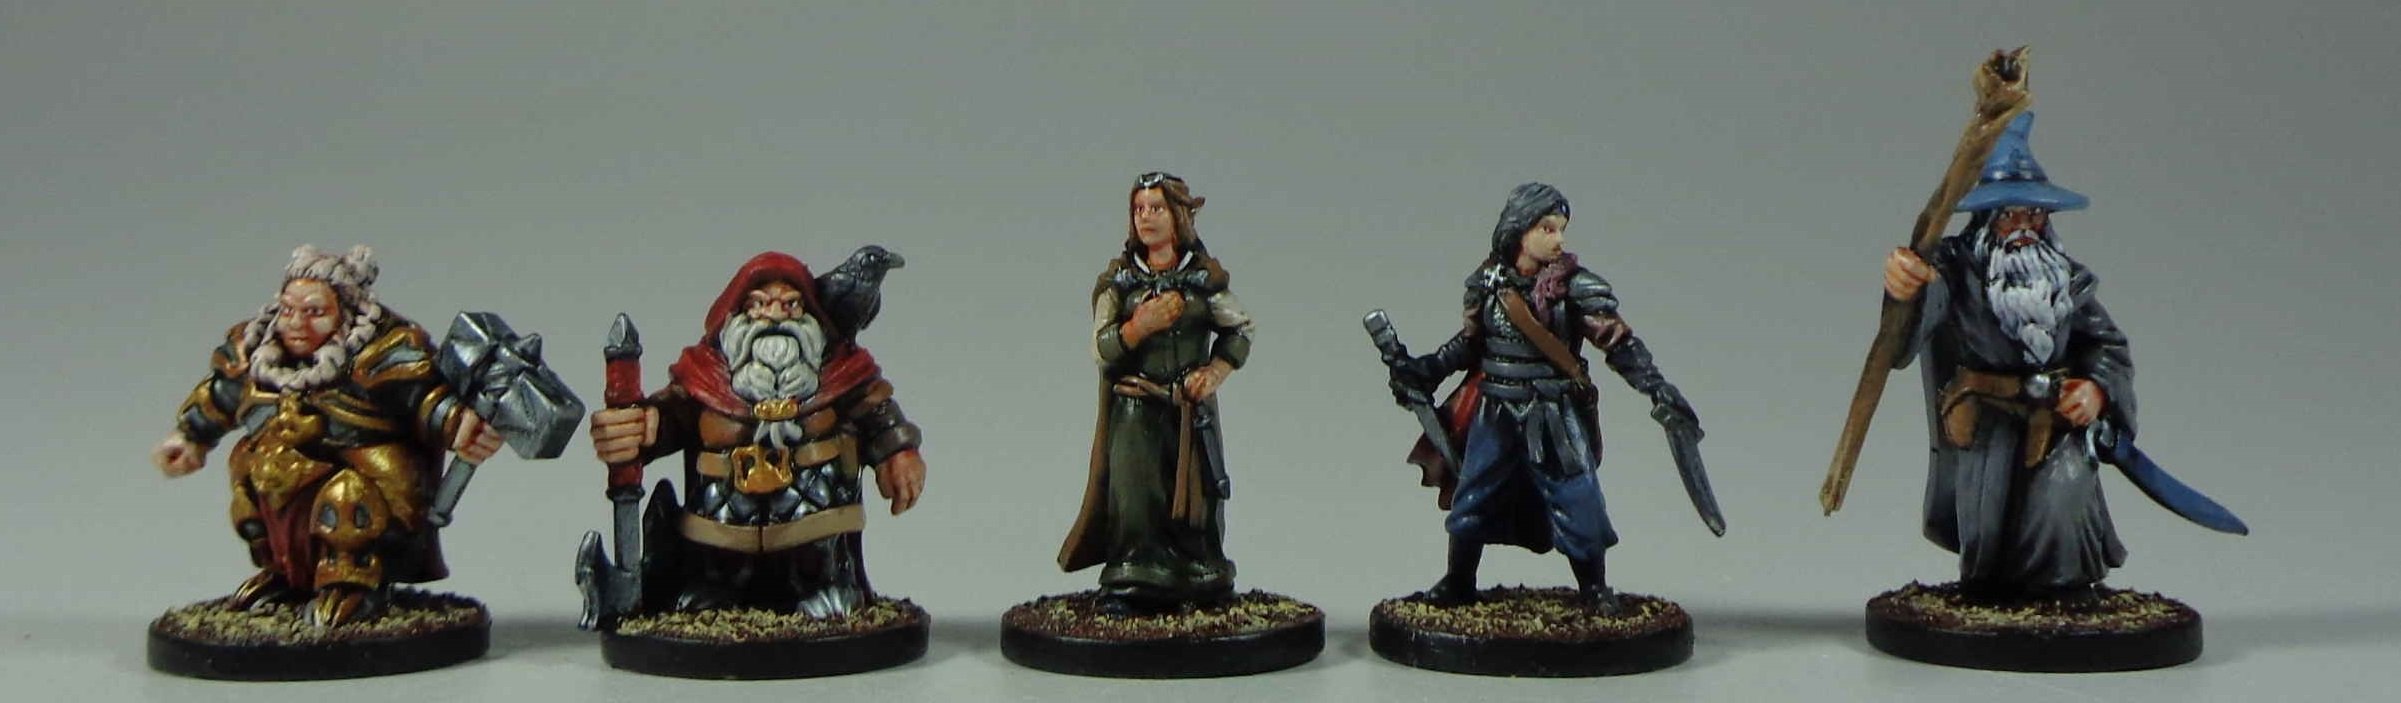 Journeys in Middle Earth Miniature Painting Service (13).jpg